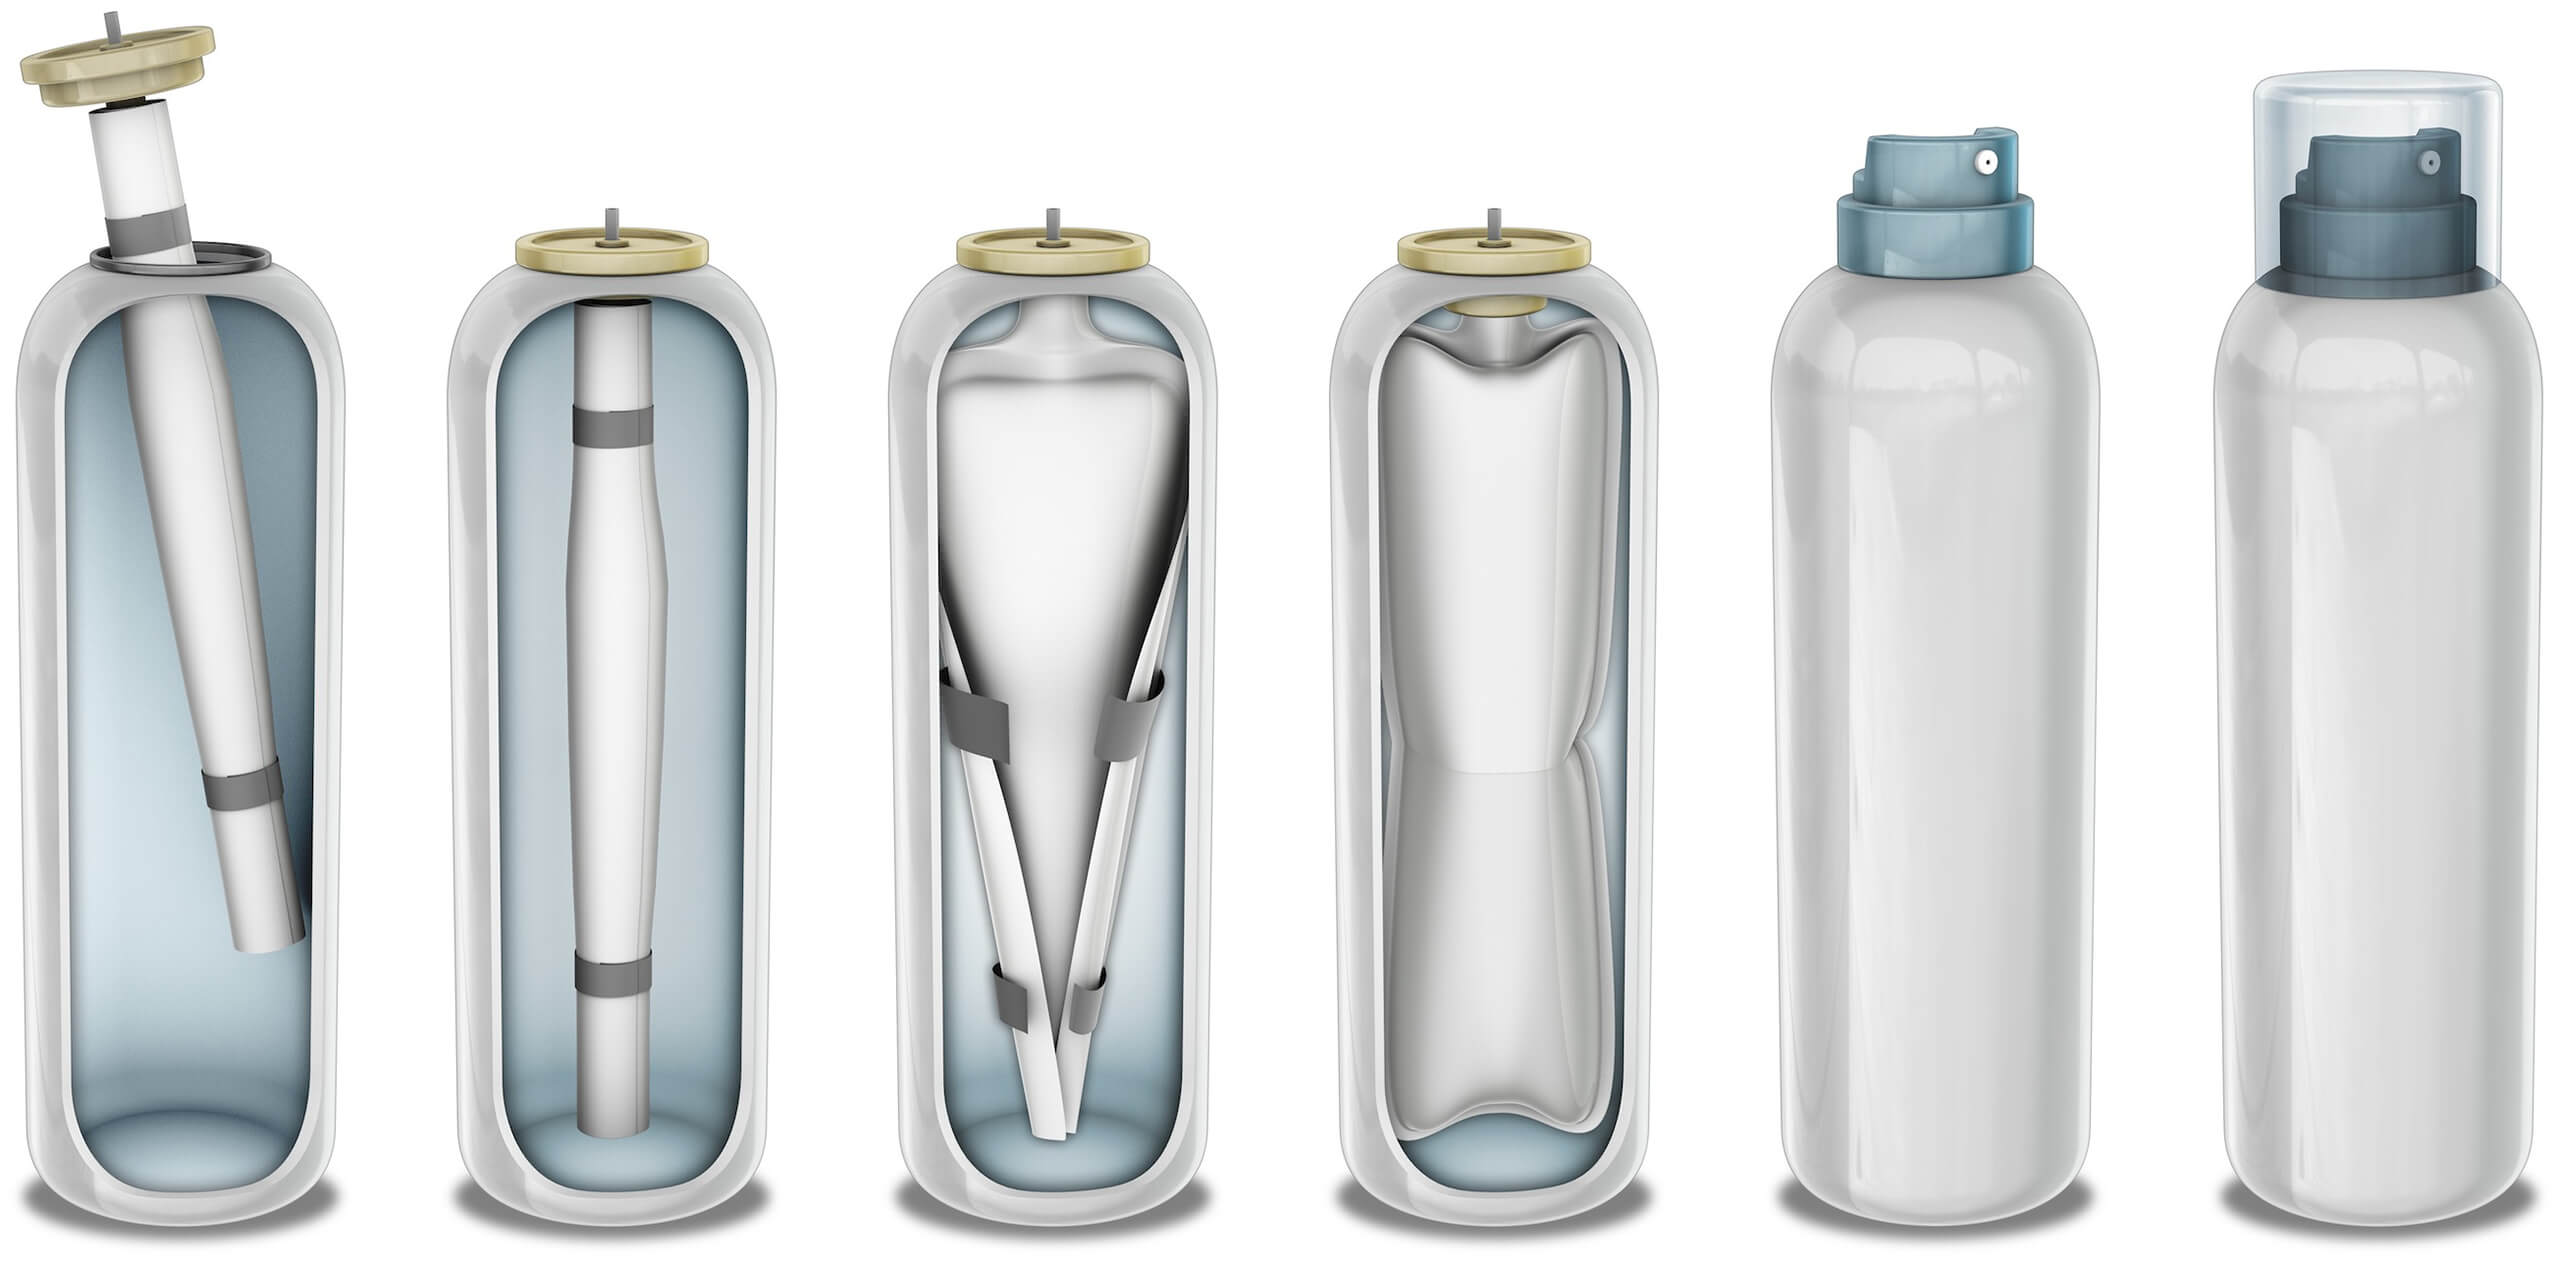 Stages of the Bag-on-Valve aerosol production process